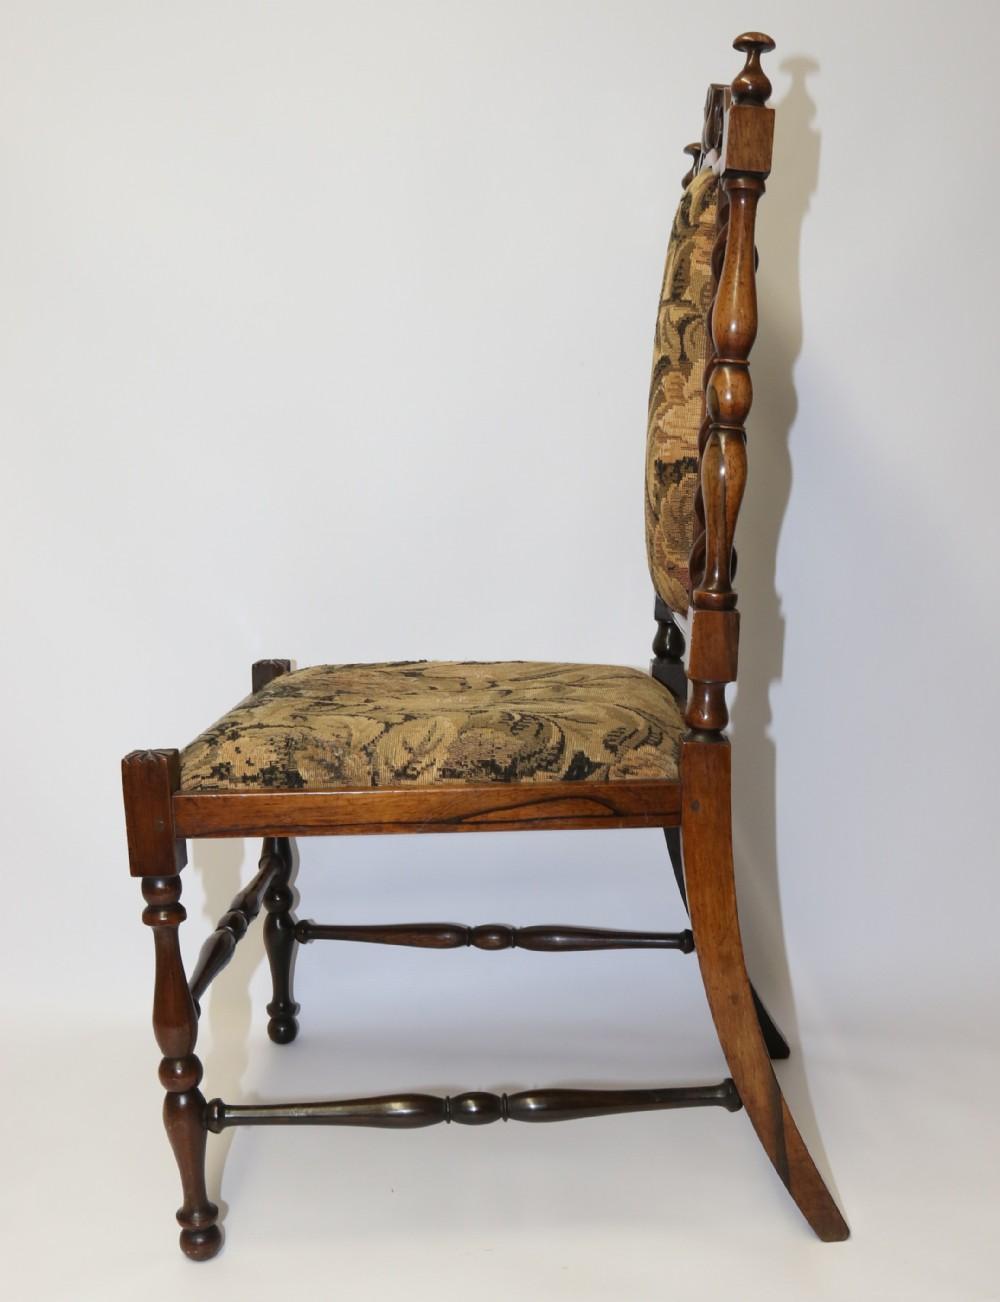 This superb rarity was made circa 1835. It is constructed in solid figured rosewood made to a delicate and ornate design incorporating turned legs and stretchers with a drop in seat and the back panel upholstered in worn but original tapestry